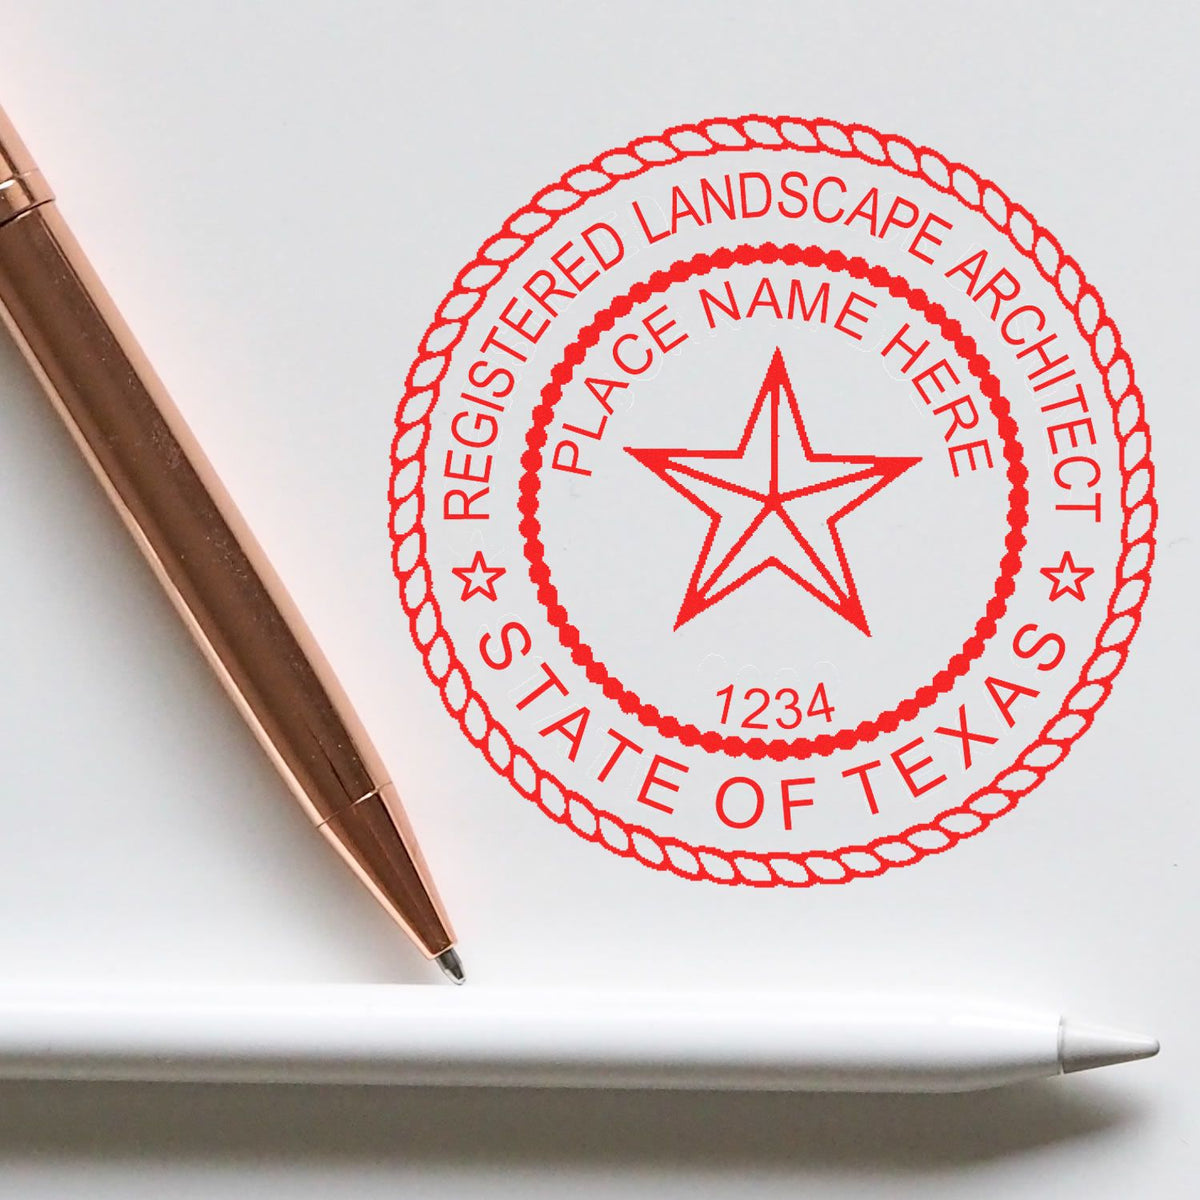 The Texas Landscape Architectural Seal Stamp stamp impression comes to life with a crisp, detailed photo on paper - showcasing true professional quality.